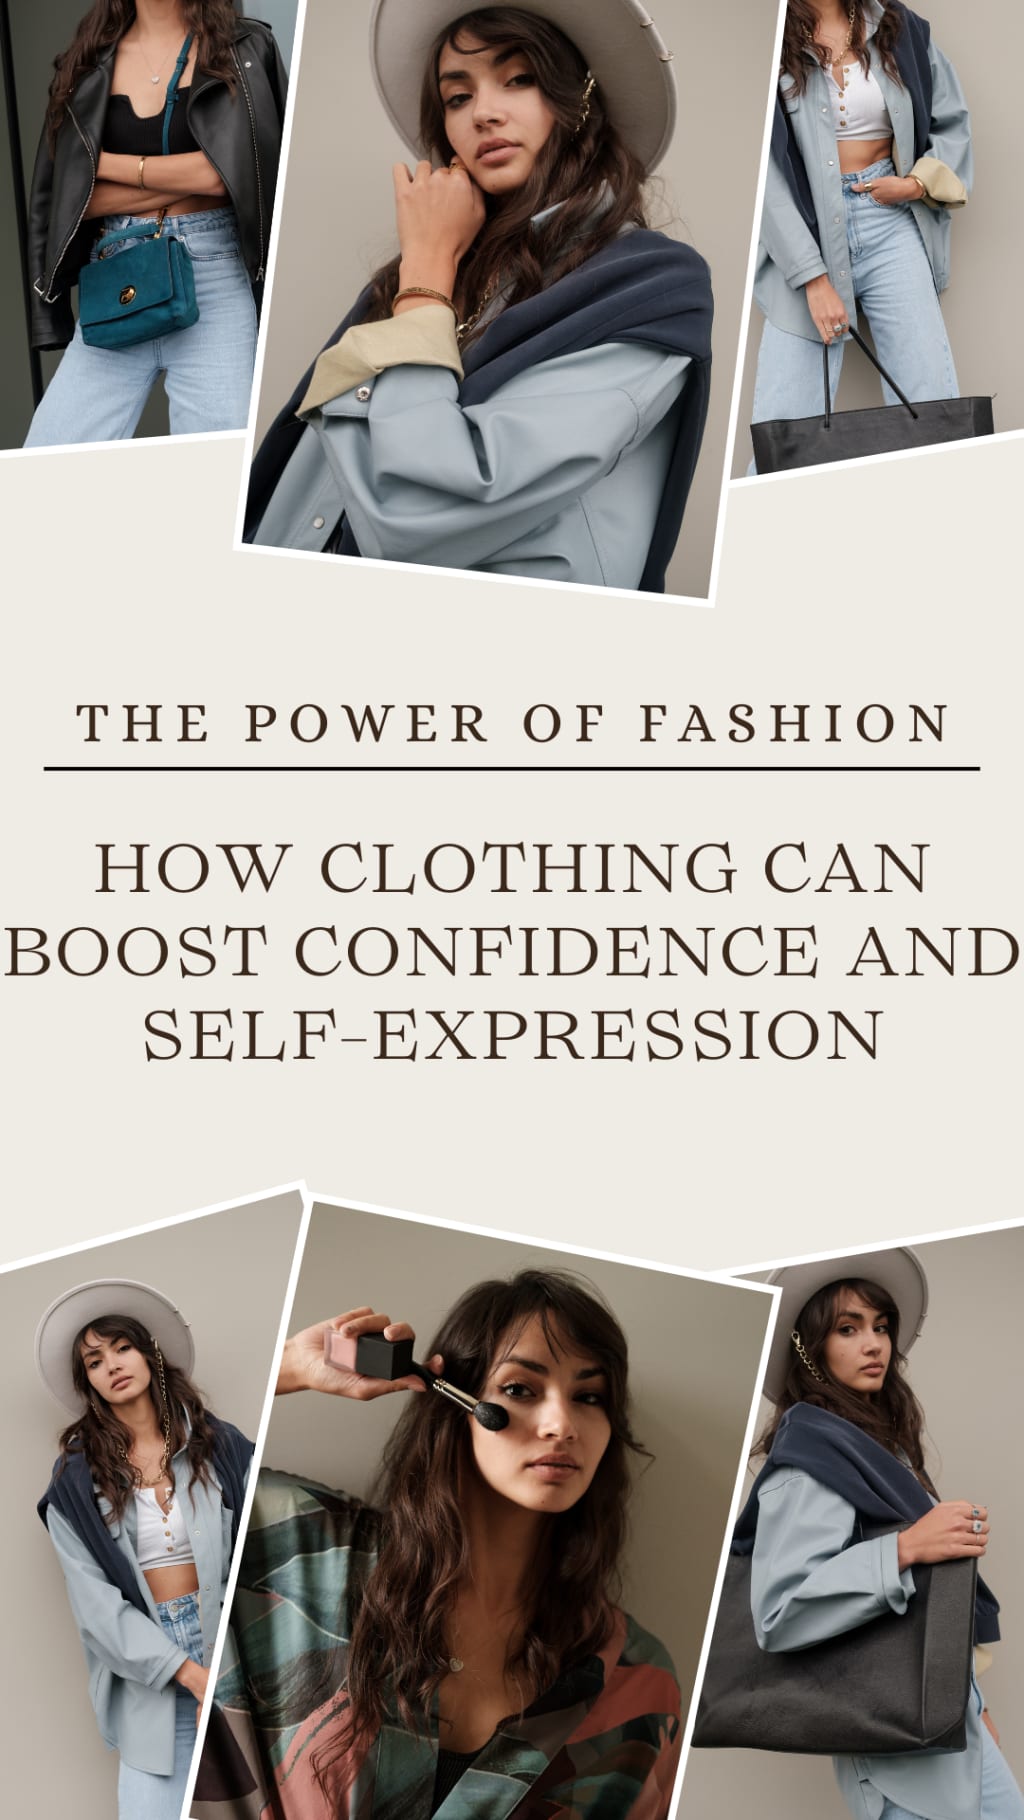 Fashion with Purpose: Prioritizing Fit, Comfort, and Individuality